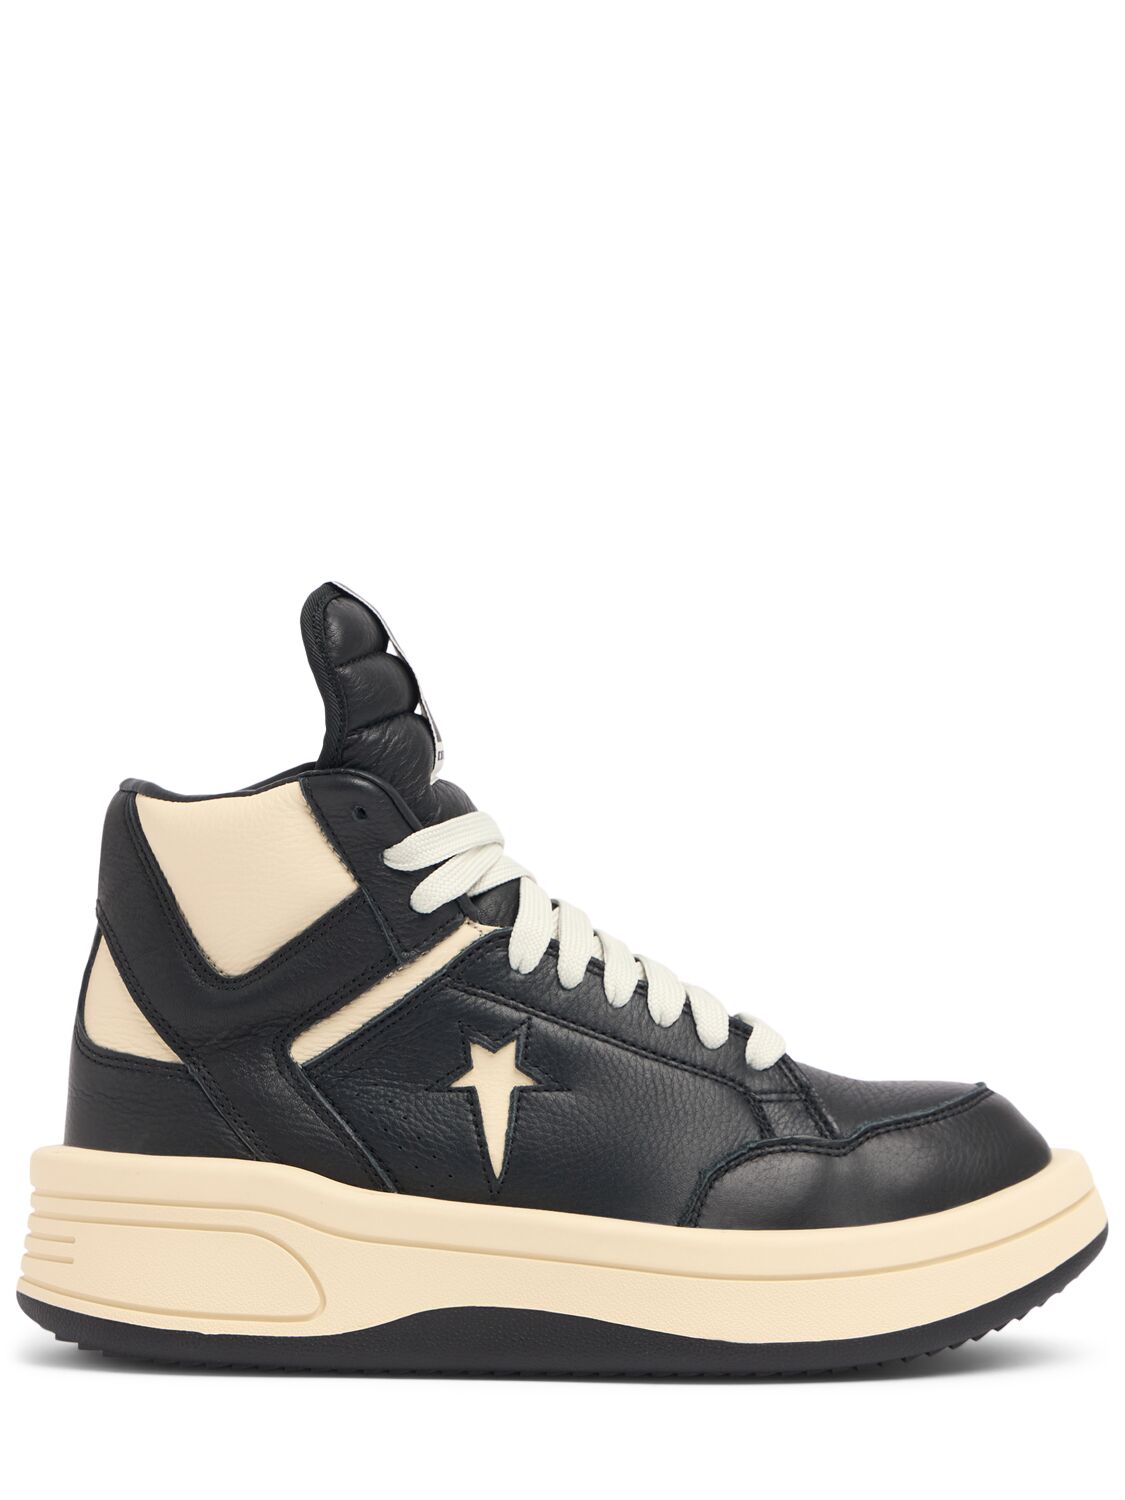 Turbowpn Leather Sneakers